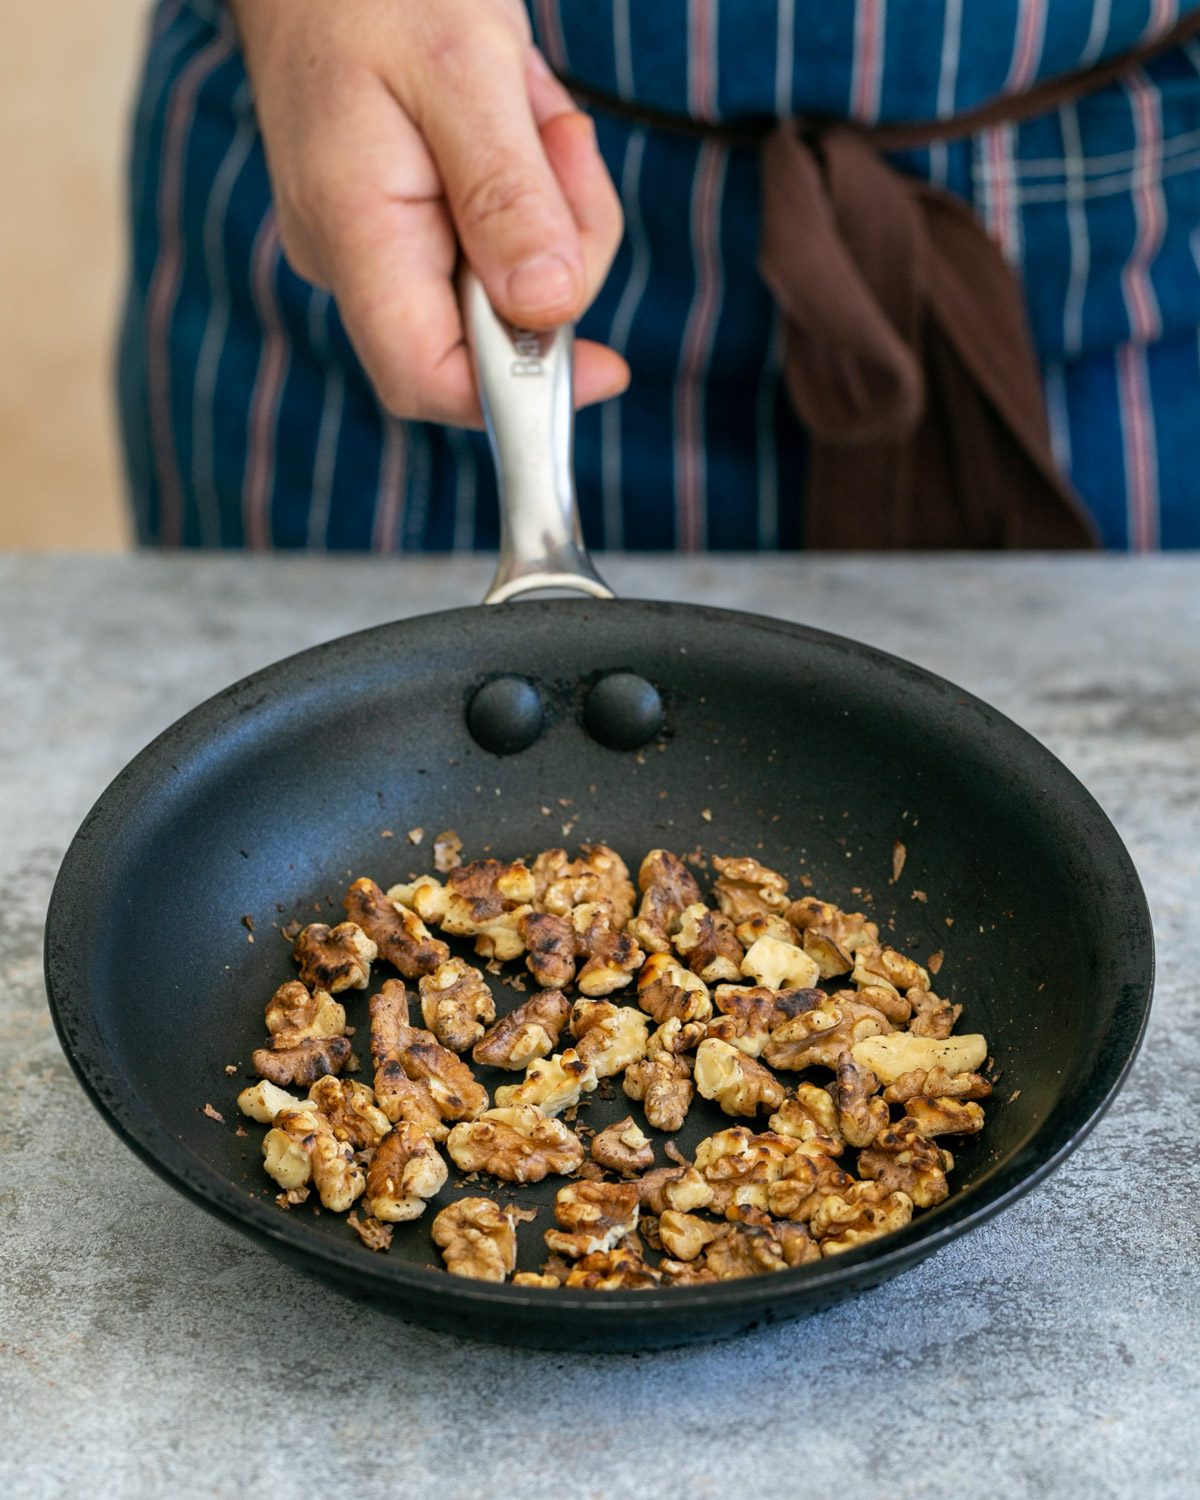 Roasted walnuts in a pan